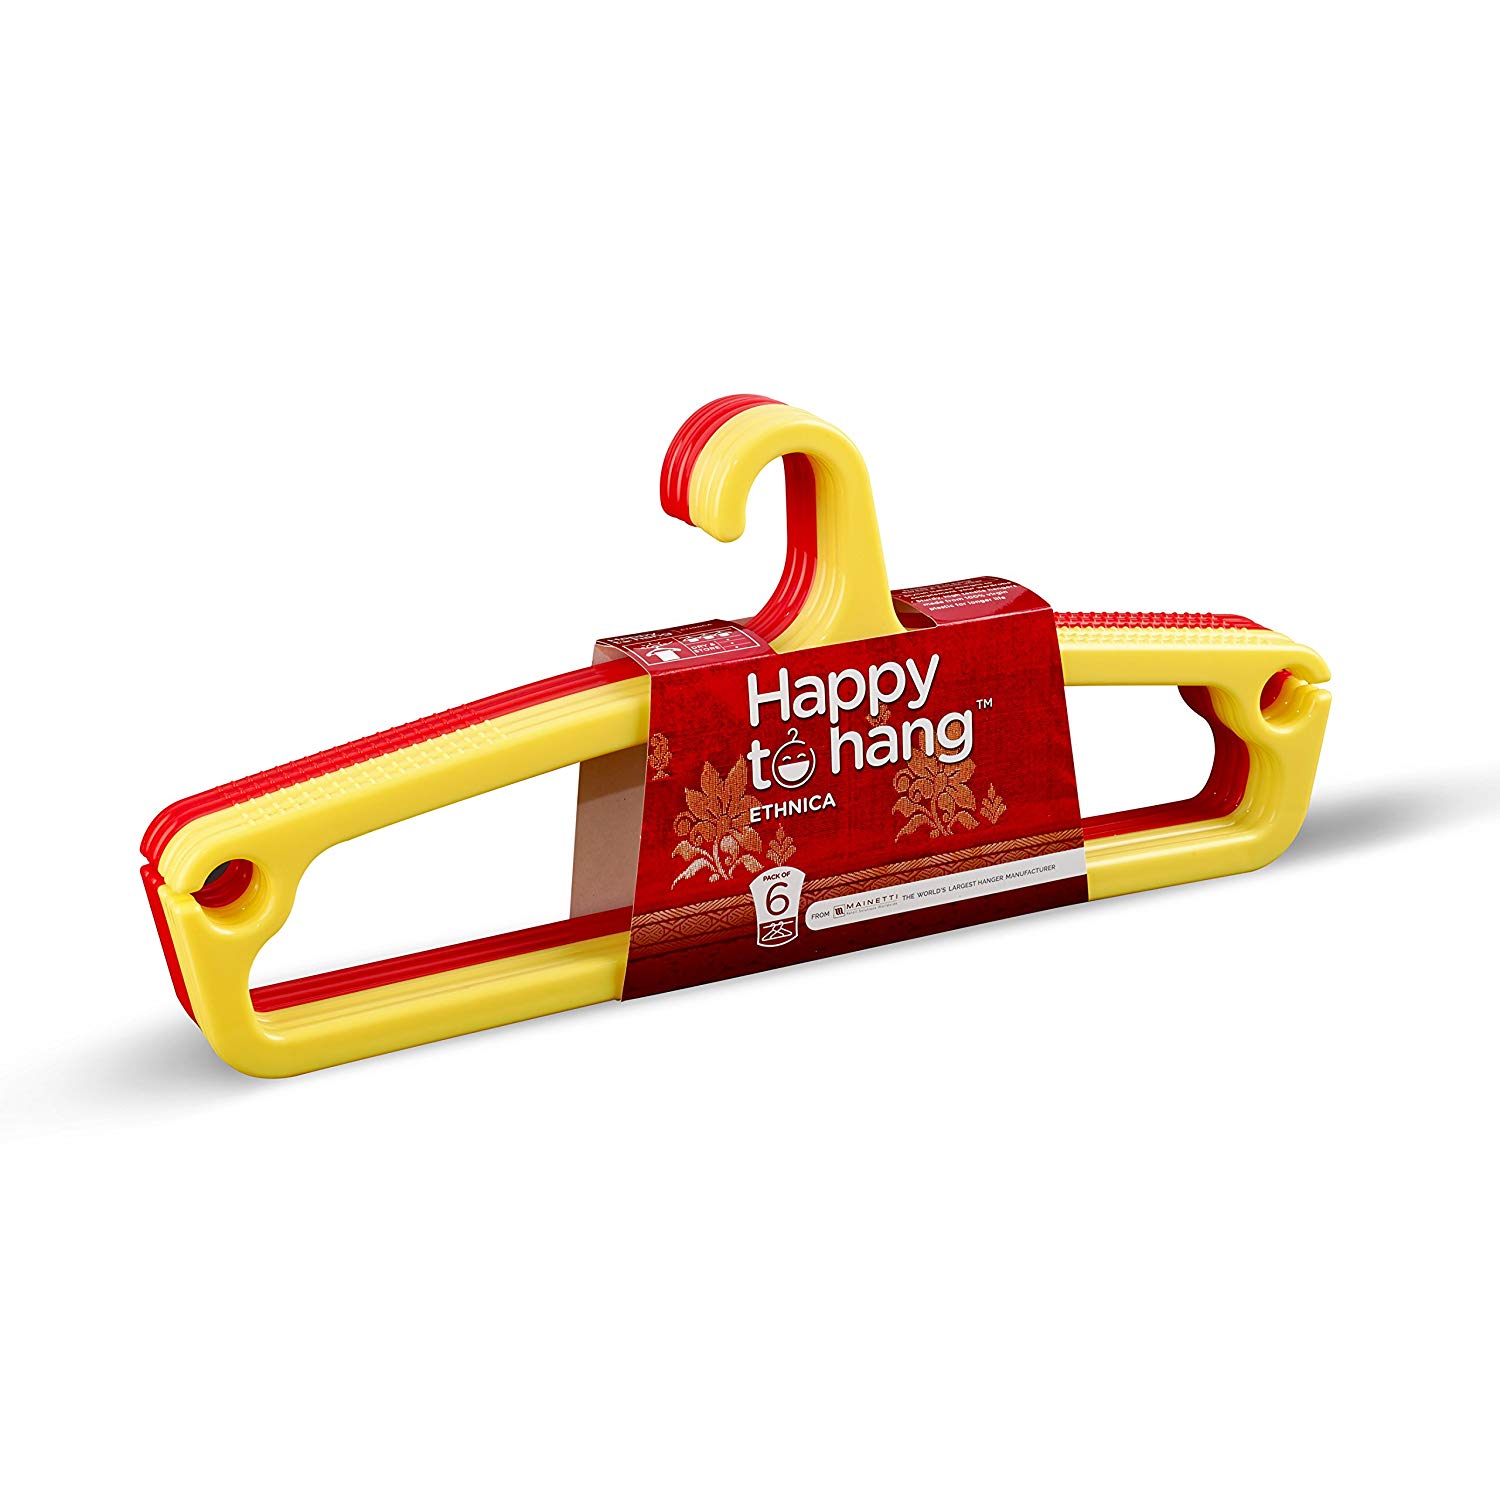 Happy-To-Hang-Ethnica-Polypropylene-Hanger-(Yellow-and-Red),-Pack-of-6